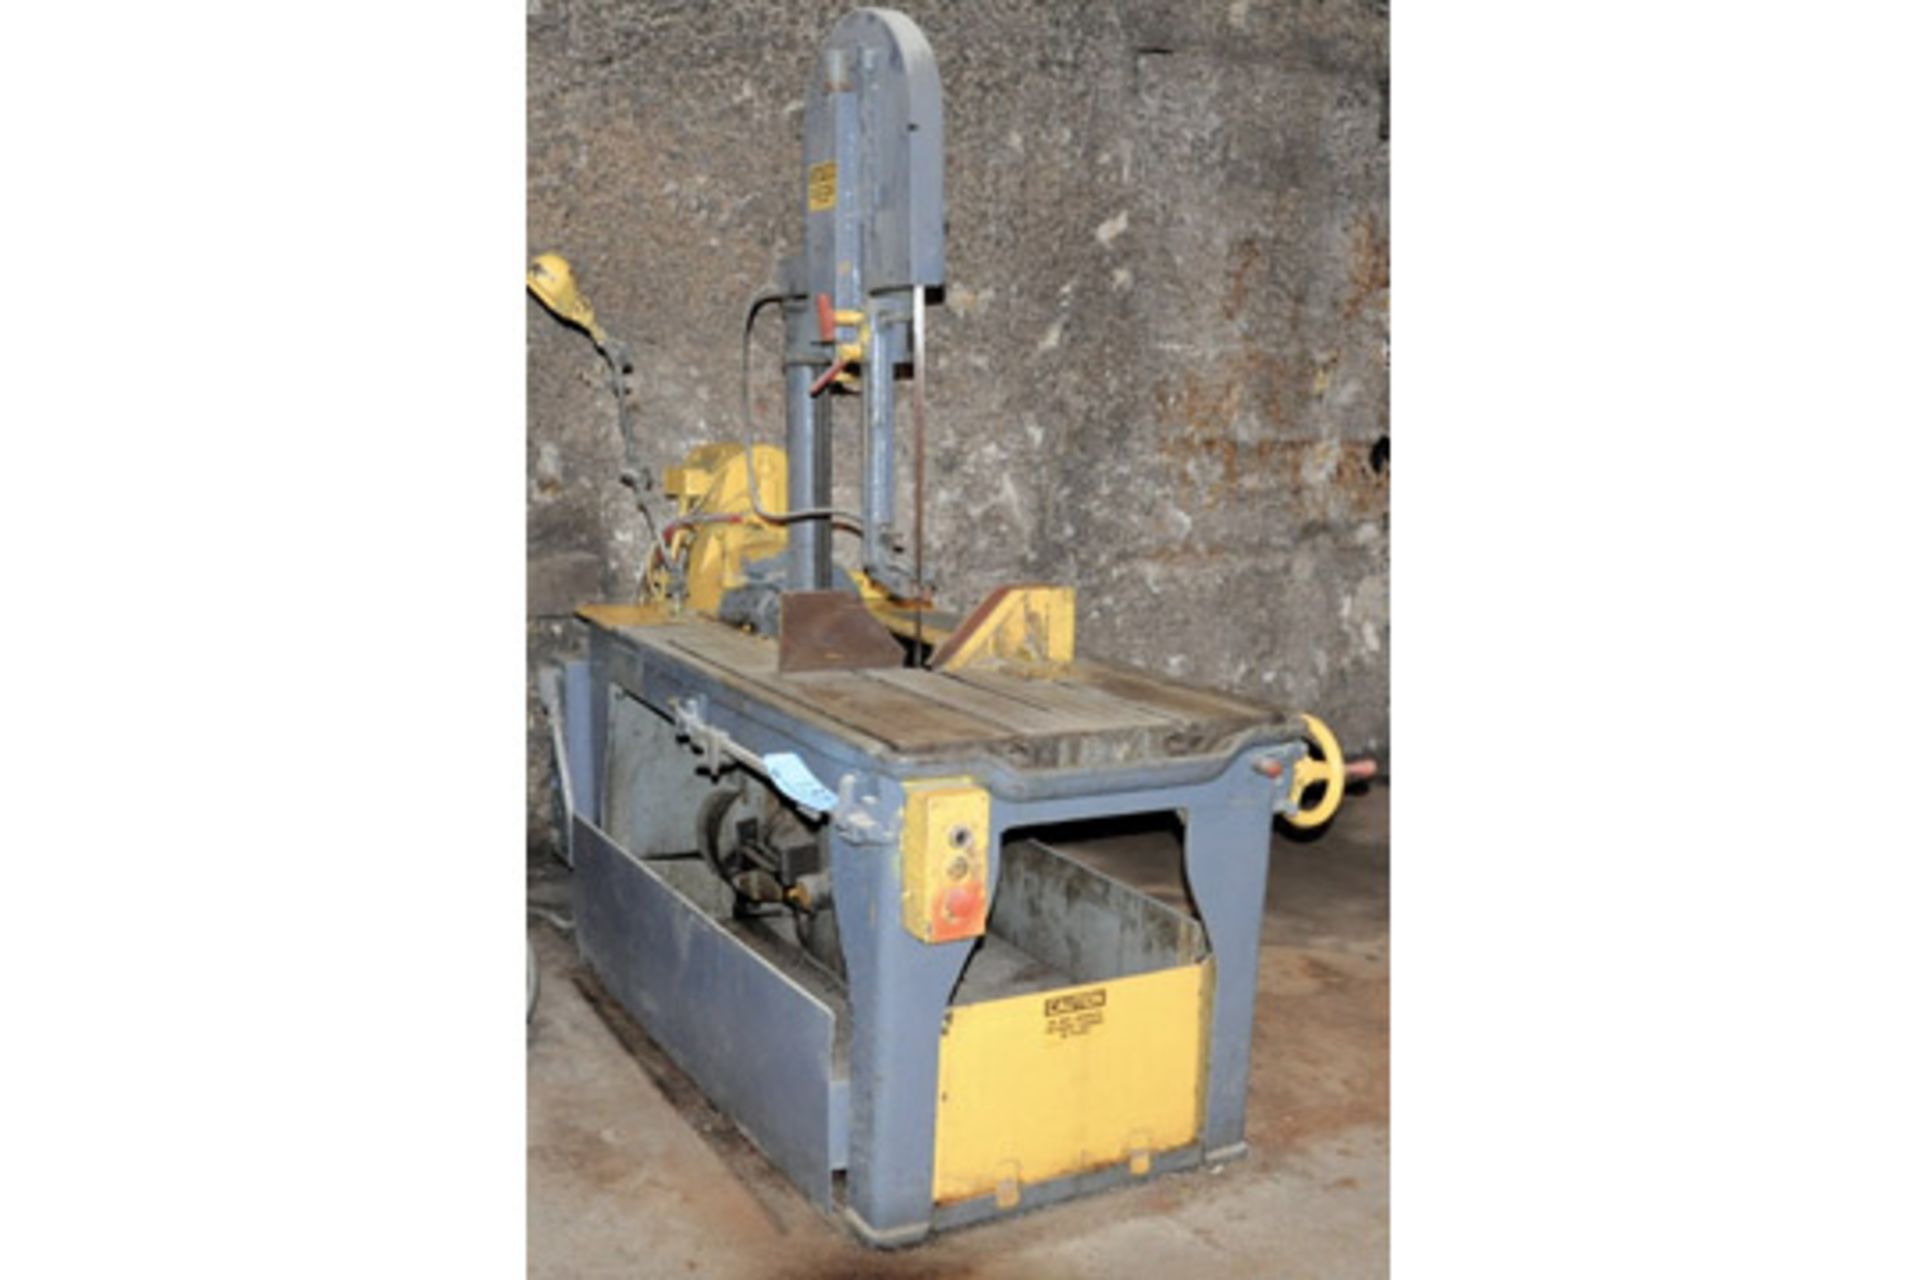 MARVEL/ARMSTRONG-BLUM SERIES 8 MODEL 8/M4 18" X 20" Vertical Tilting Metal Cutting Band Saw - Image 2 of 2